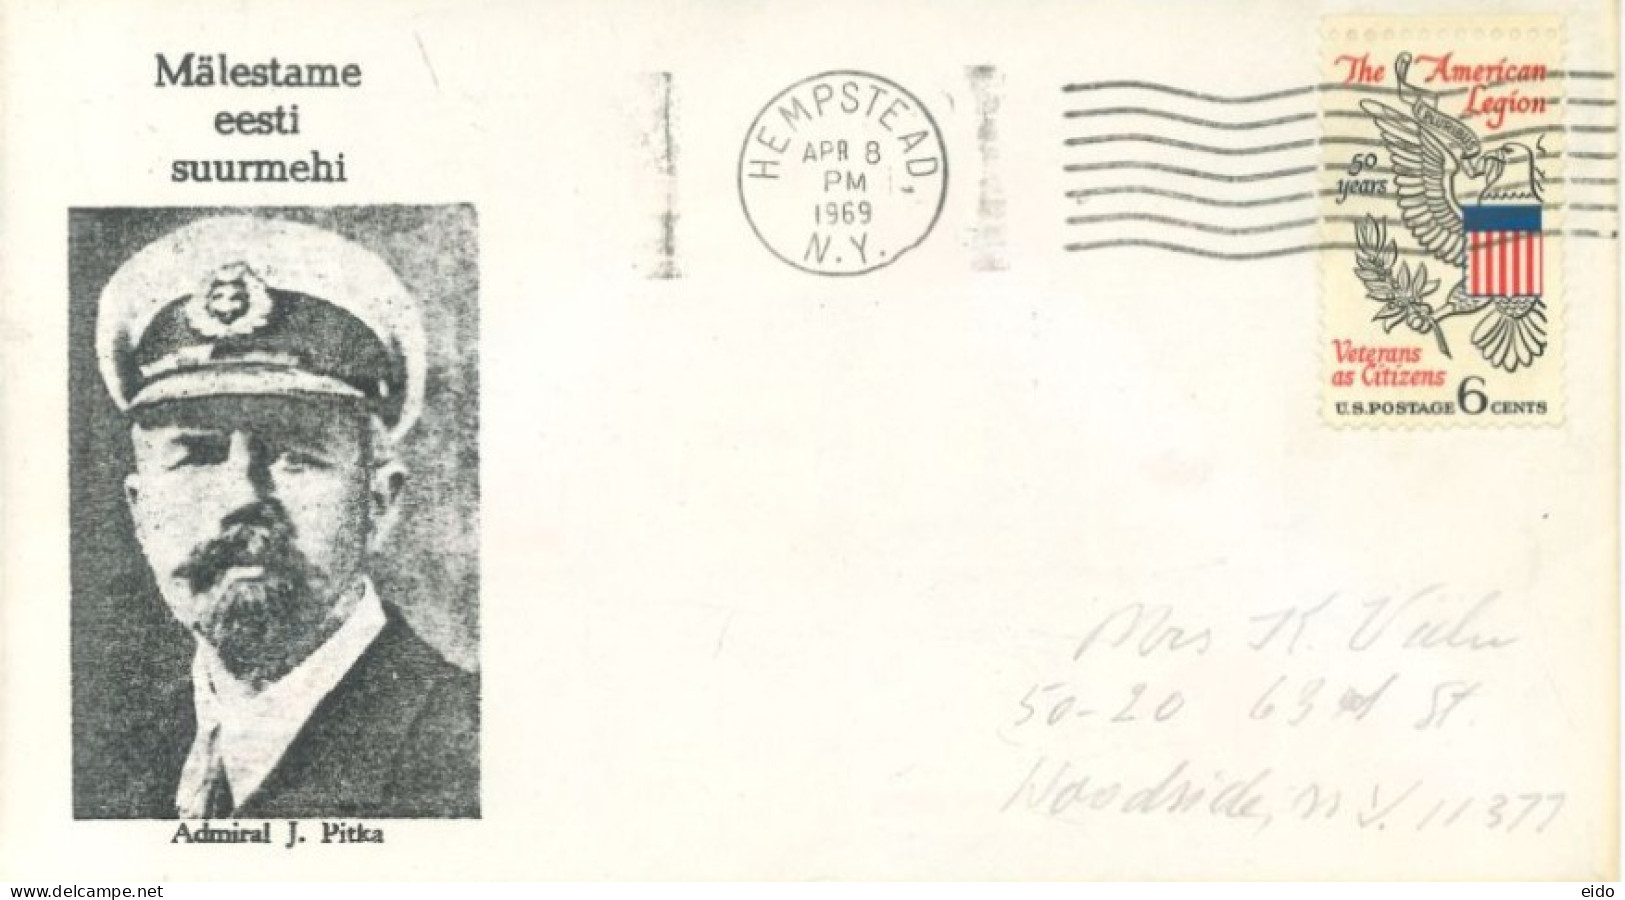 U.S.A.. -1969 -  SPECIAL STAMP COVER OF ADMIRAL J. PITKA SENT TO NEW YORK. - Briefe U. Dokumente